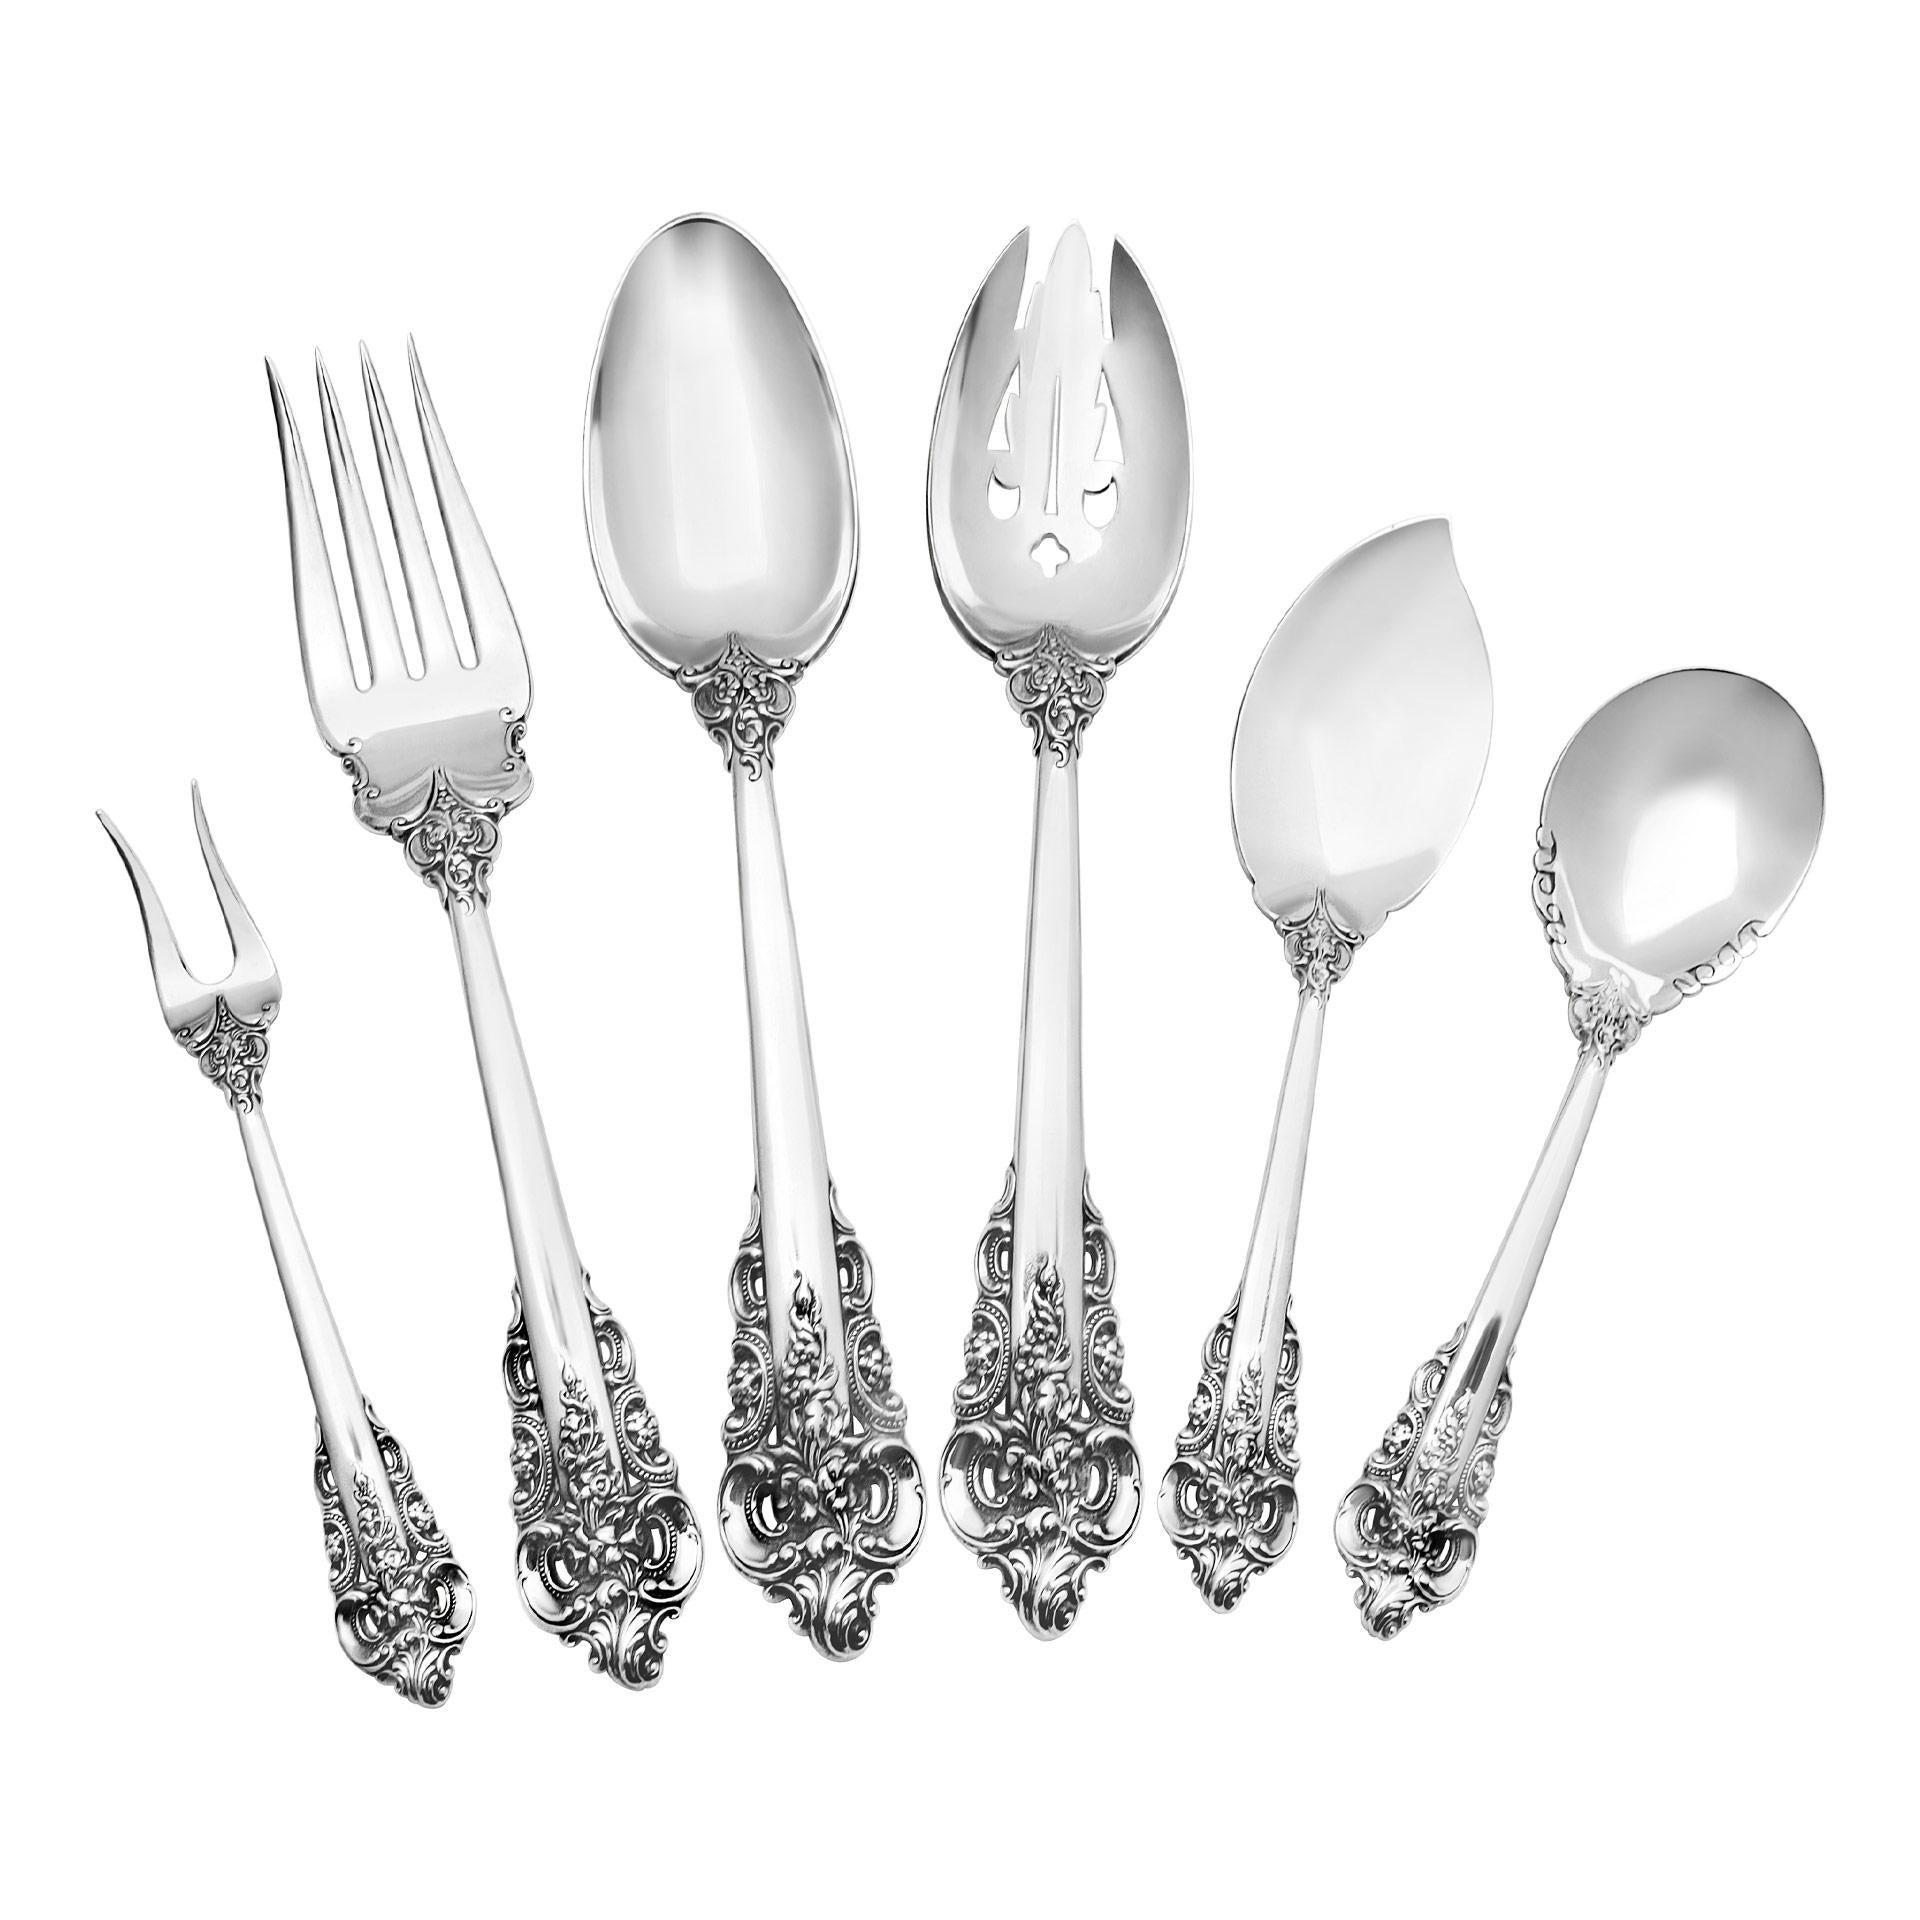 GRANDE BAROQUE Sterling Silver Flatware- Patented in 1941 by Wallace. 6 place setting for 10 + 10 serving pieces- Over 3000 grams of sterling silver. PLACE SETTING: 10 place knives (8 7/8